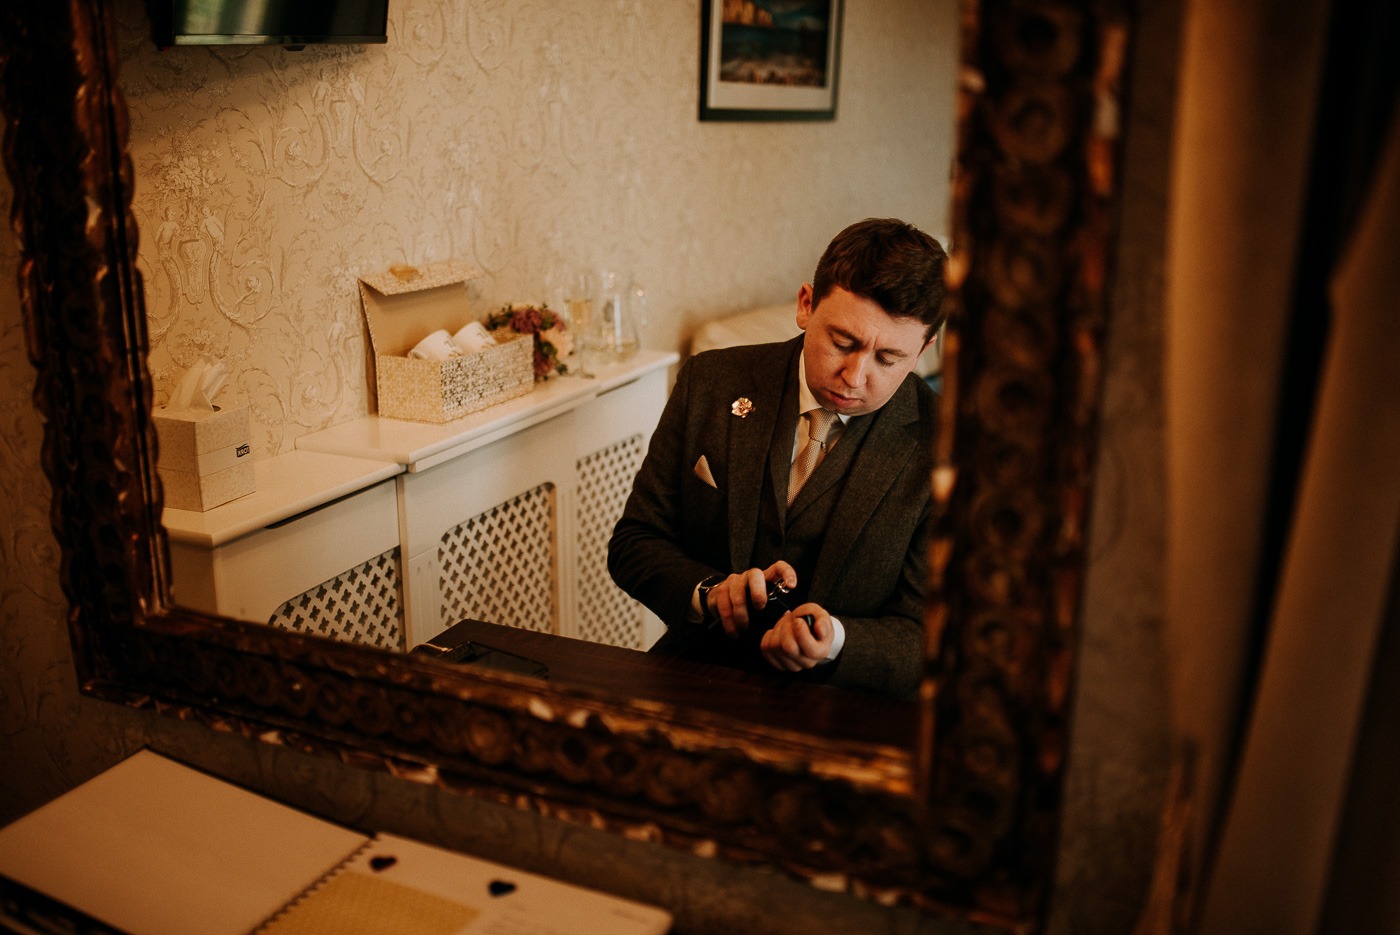 A man standing in front of a mirror posing for the camera